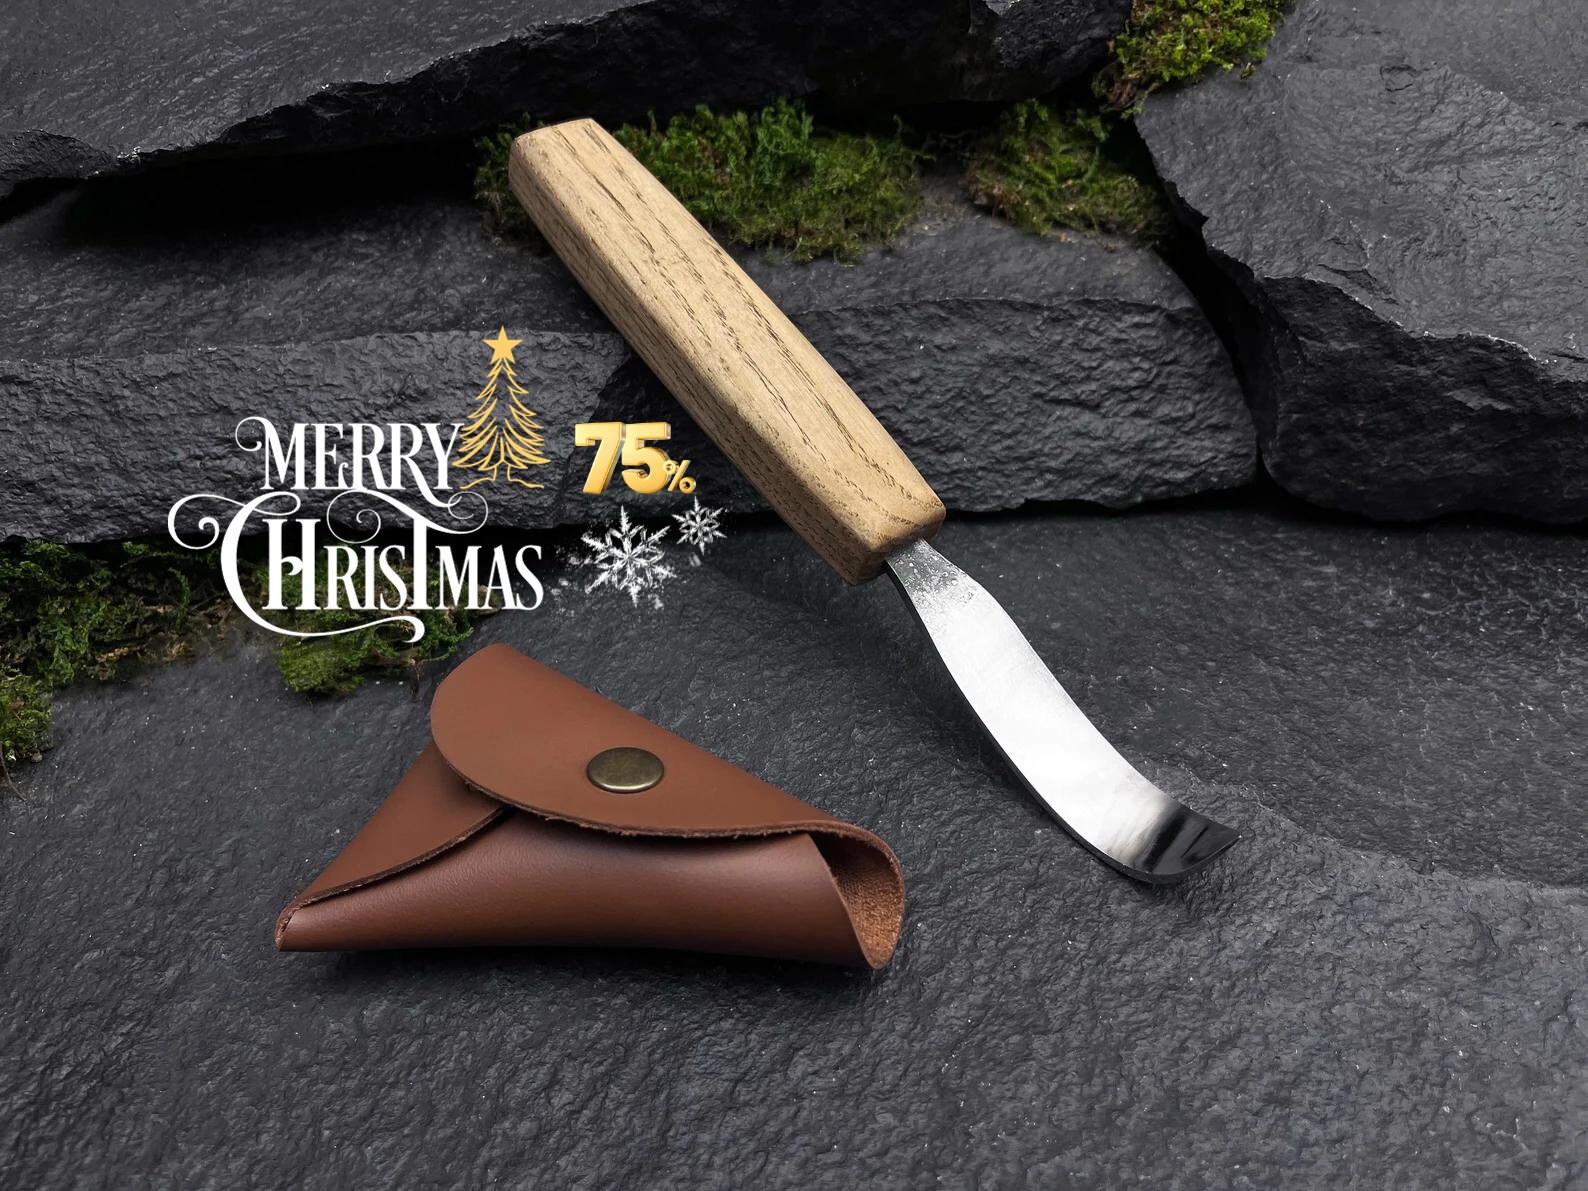 Michihamono Japanese Wood Carving Hand Tool Woodworking Hook Knife, with Blade Sheath, for Spoon & Bowl Carving 60mm